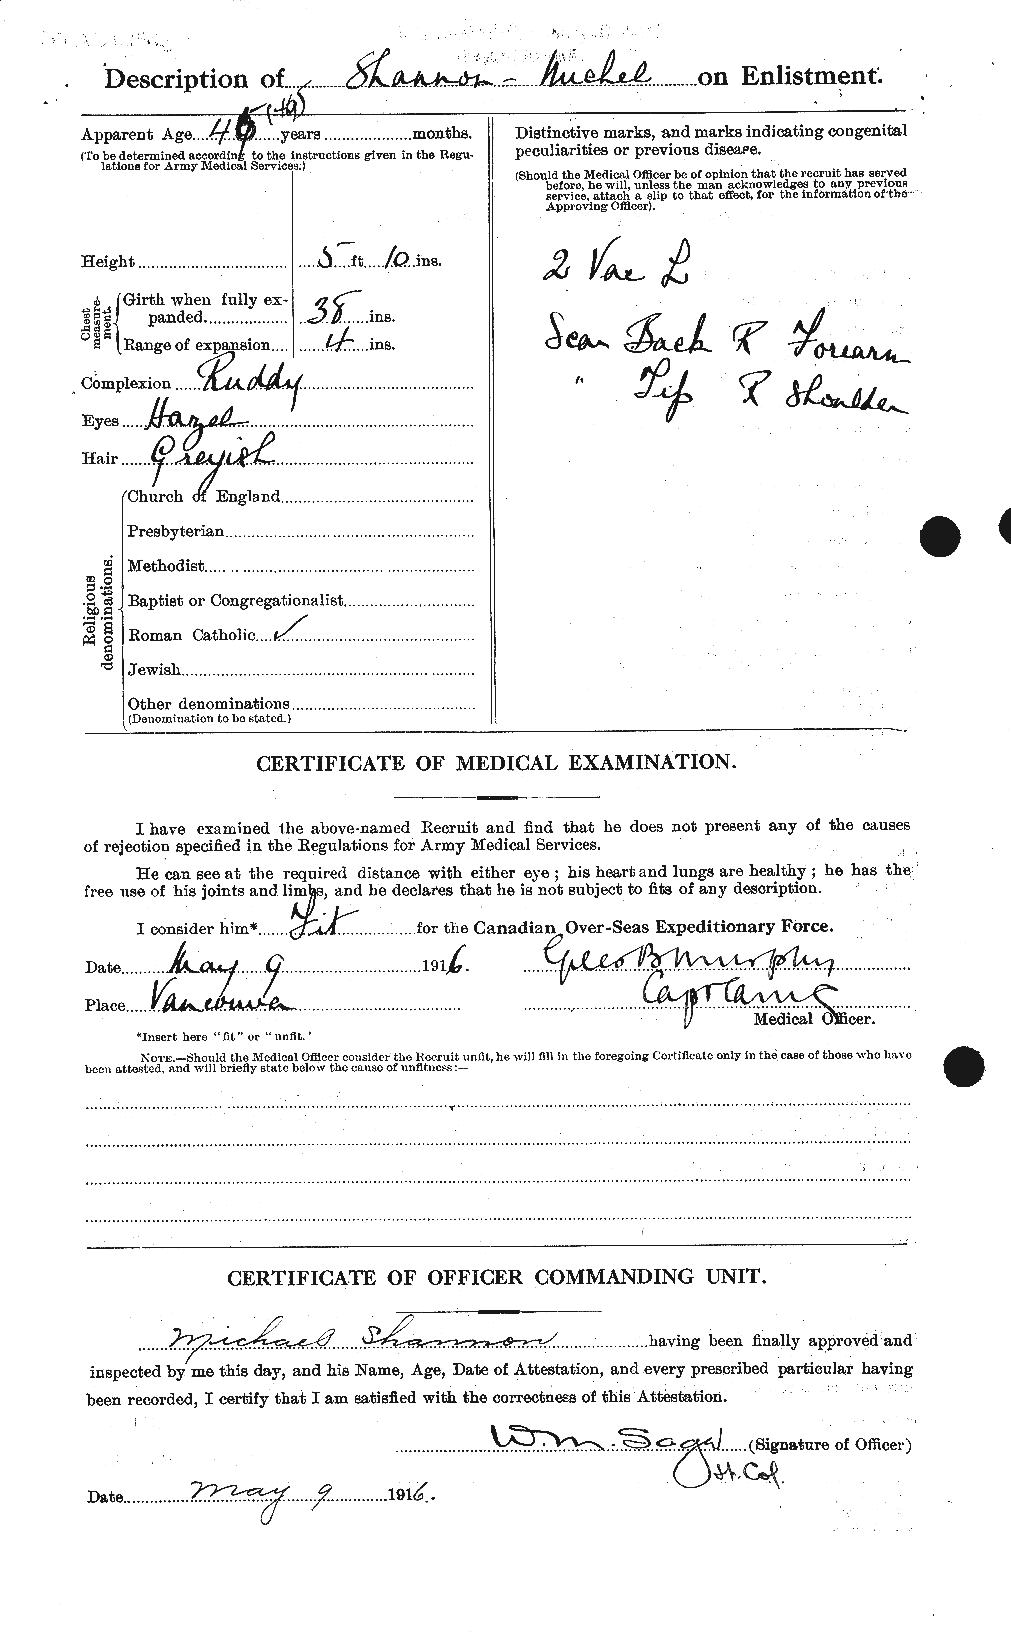 Personnel Records of the First World War - CEF 088440b